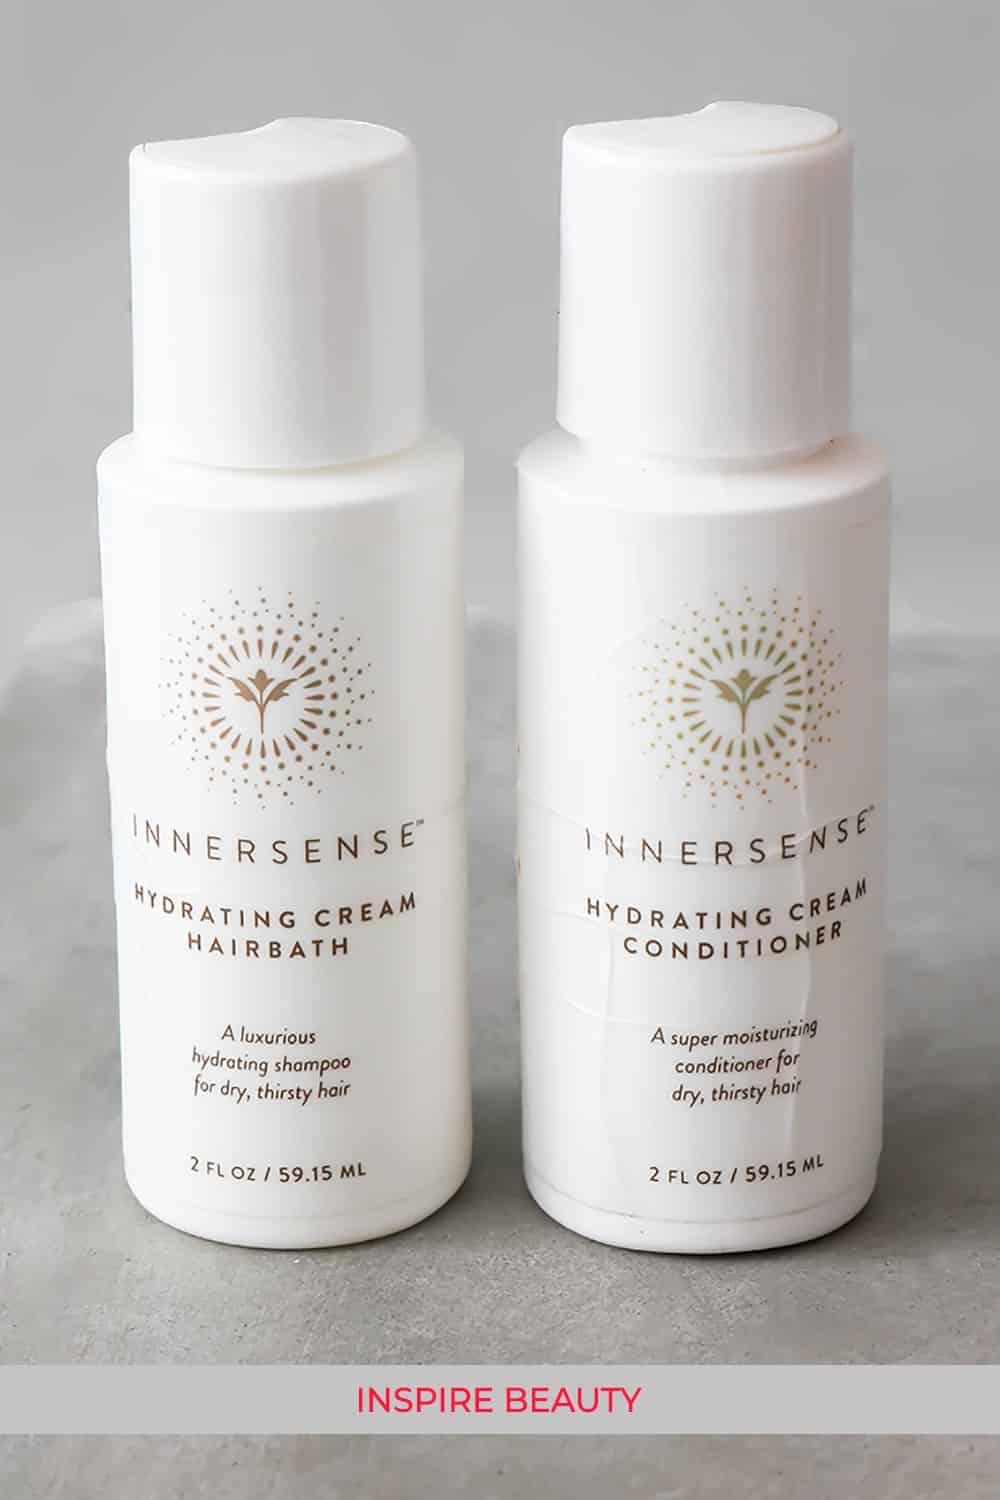 Innersense Hydrating Cream Hairbath and Hydrating Cream Conditioner review for dry, coarse, parched hair